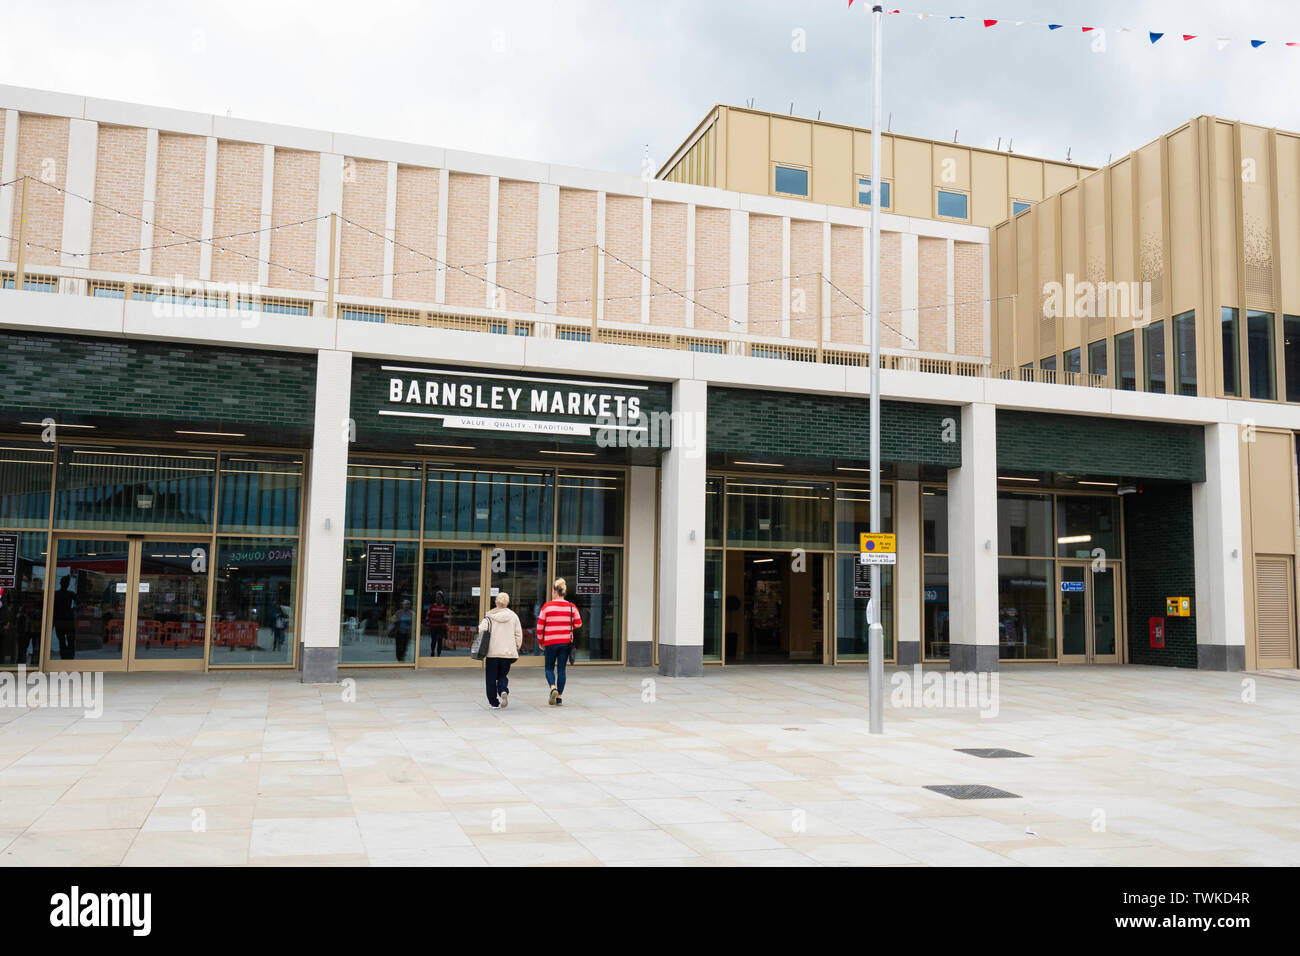 Barnsley Markets - The Glass Works - town centre regeneration and retail development including Barnsley Markets - during construction 2019, Barnsley, Stock Photo